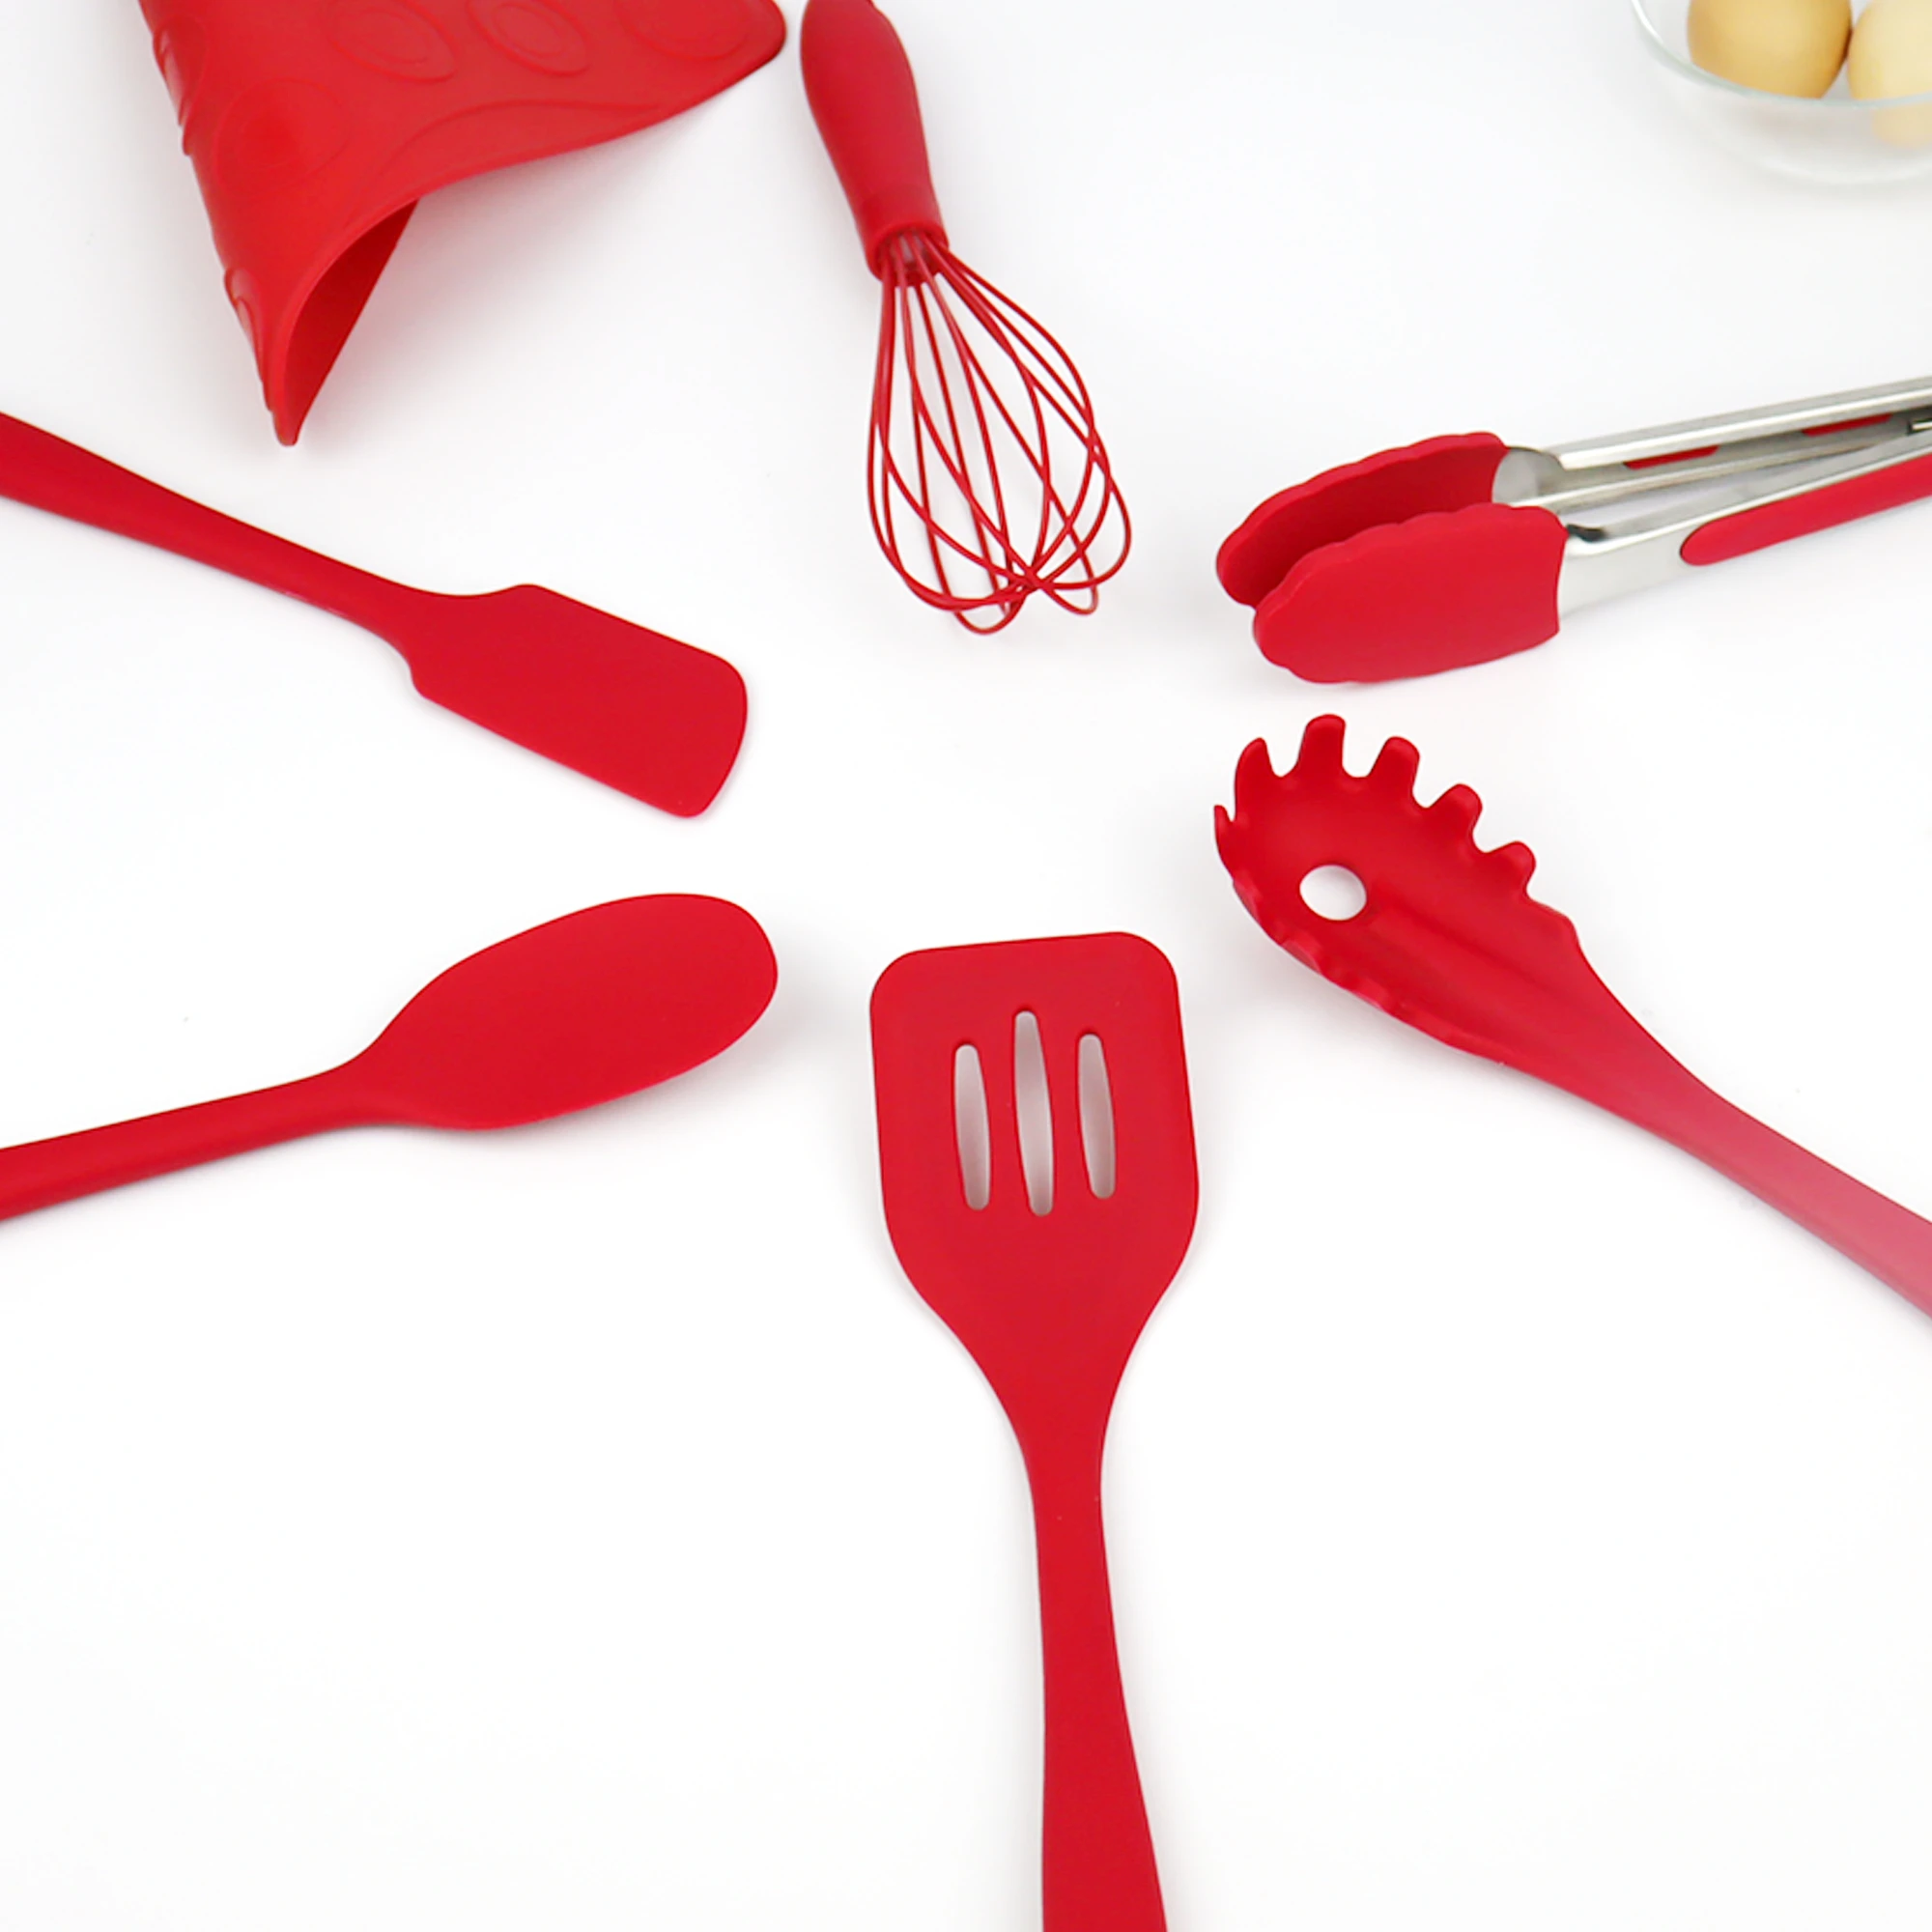 High Quality 6 pcs/set Silicone Kitchen Tools Set Eco-reusable Silicone Kitchenware Silicone Accessories Utensils